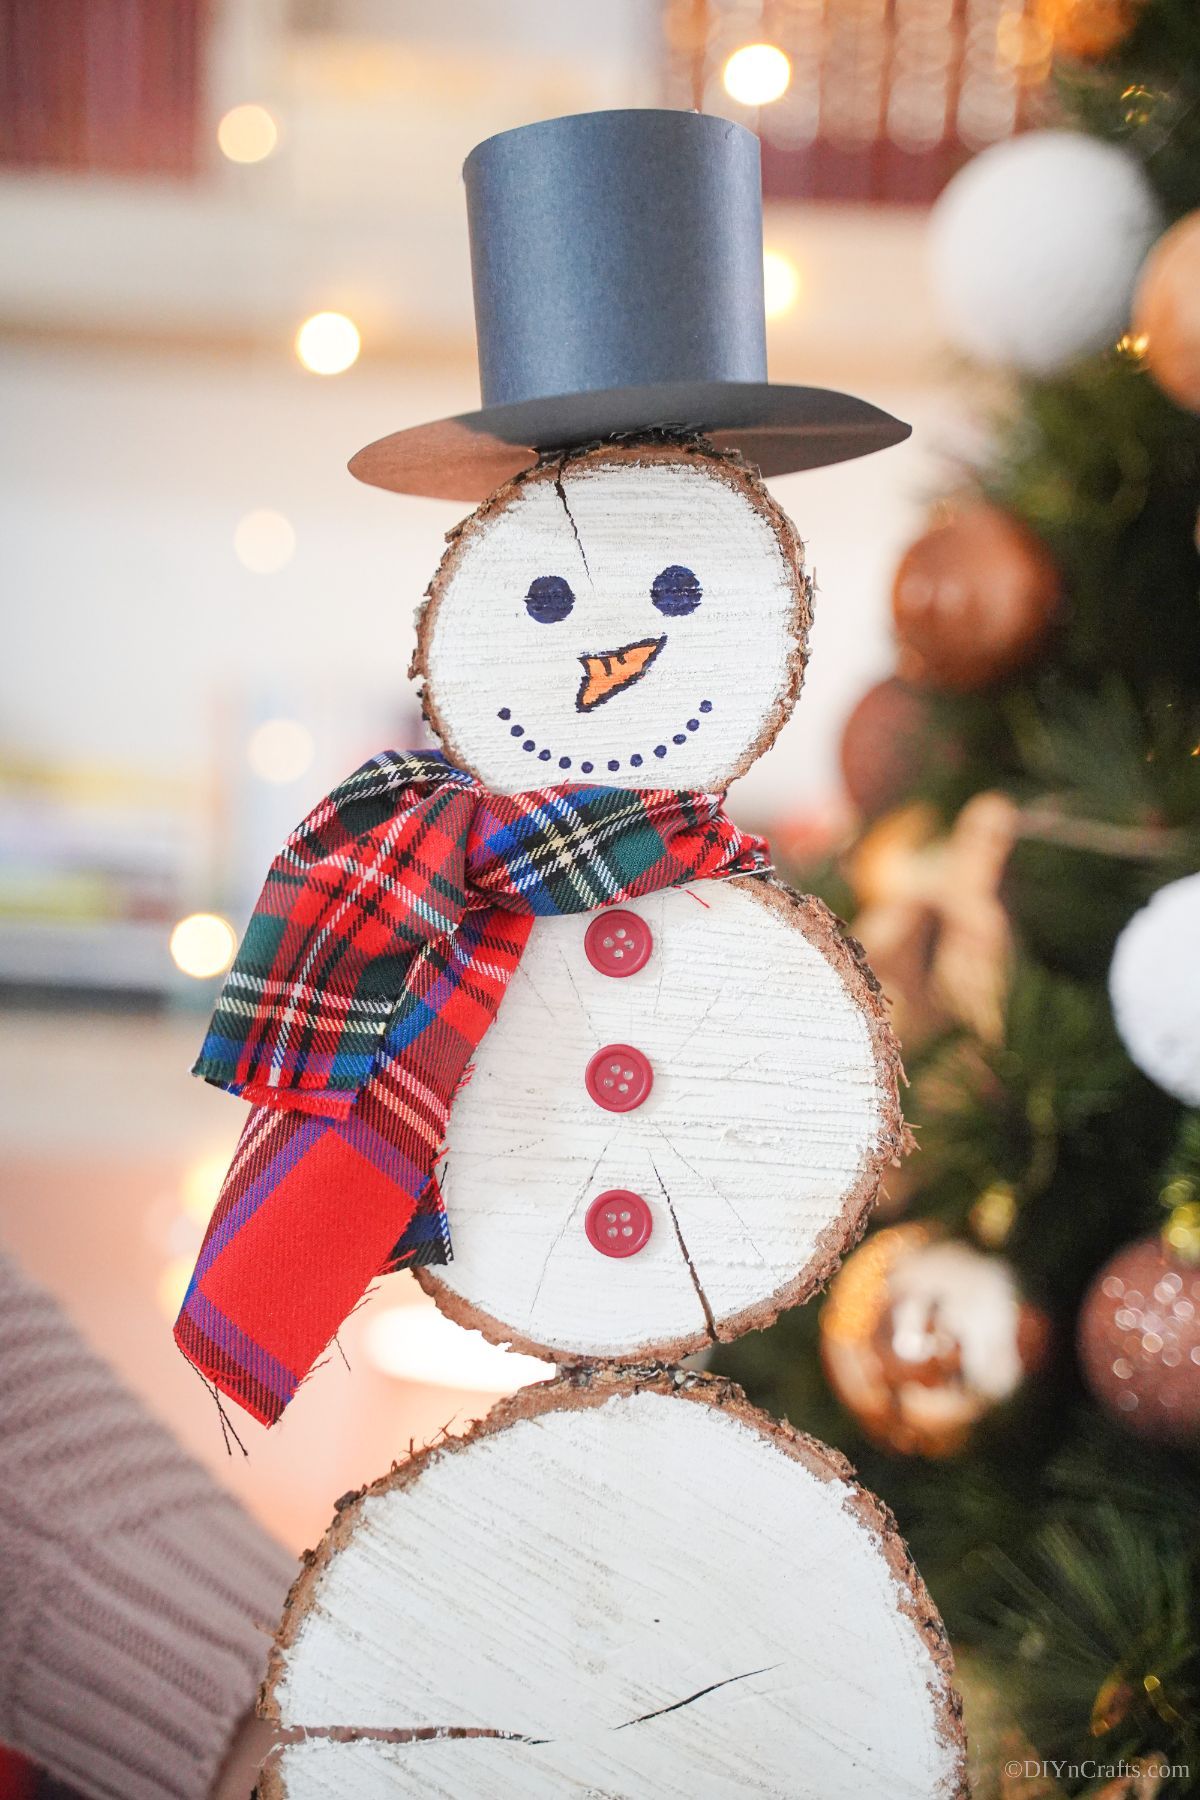 wooden slice snowman in front of holiday tree